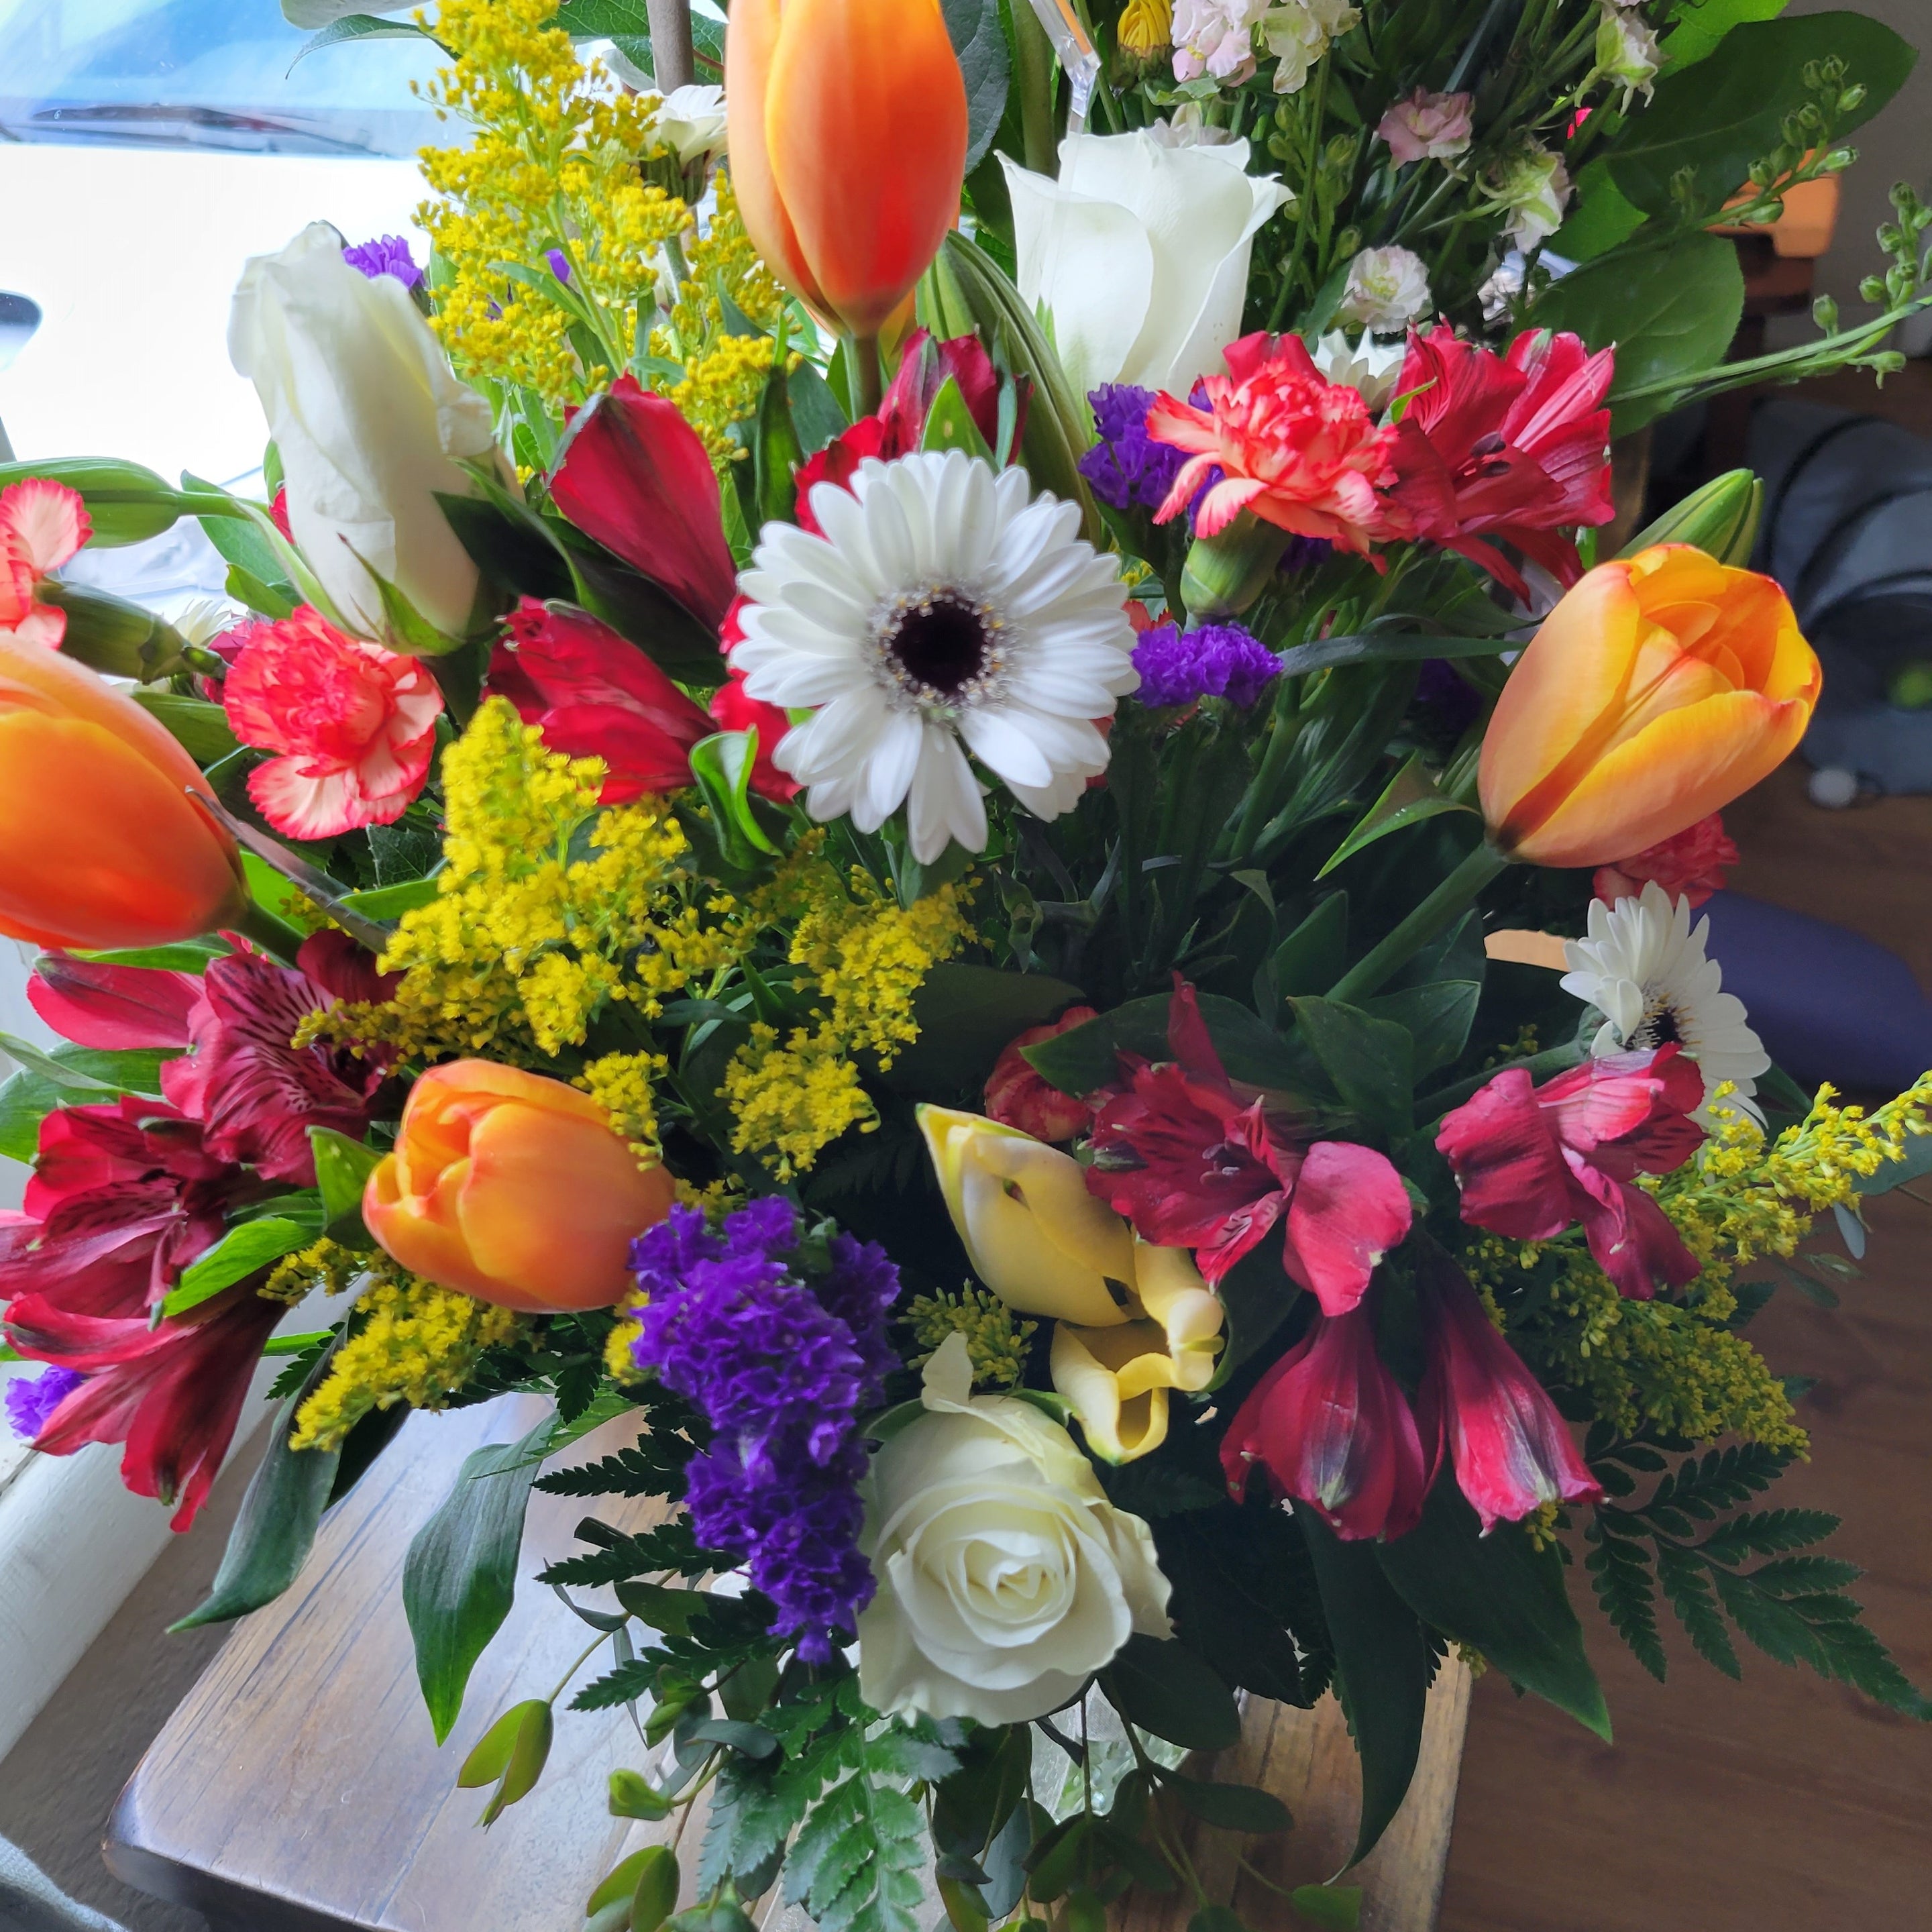 Funeral Flowers delivery by Florist of Riverside - a Riverside CA Florist